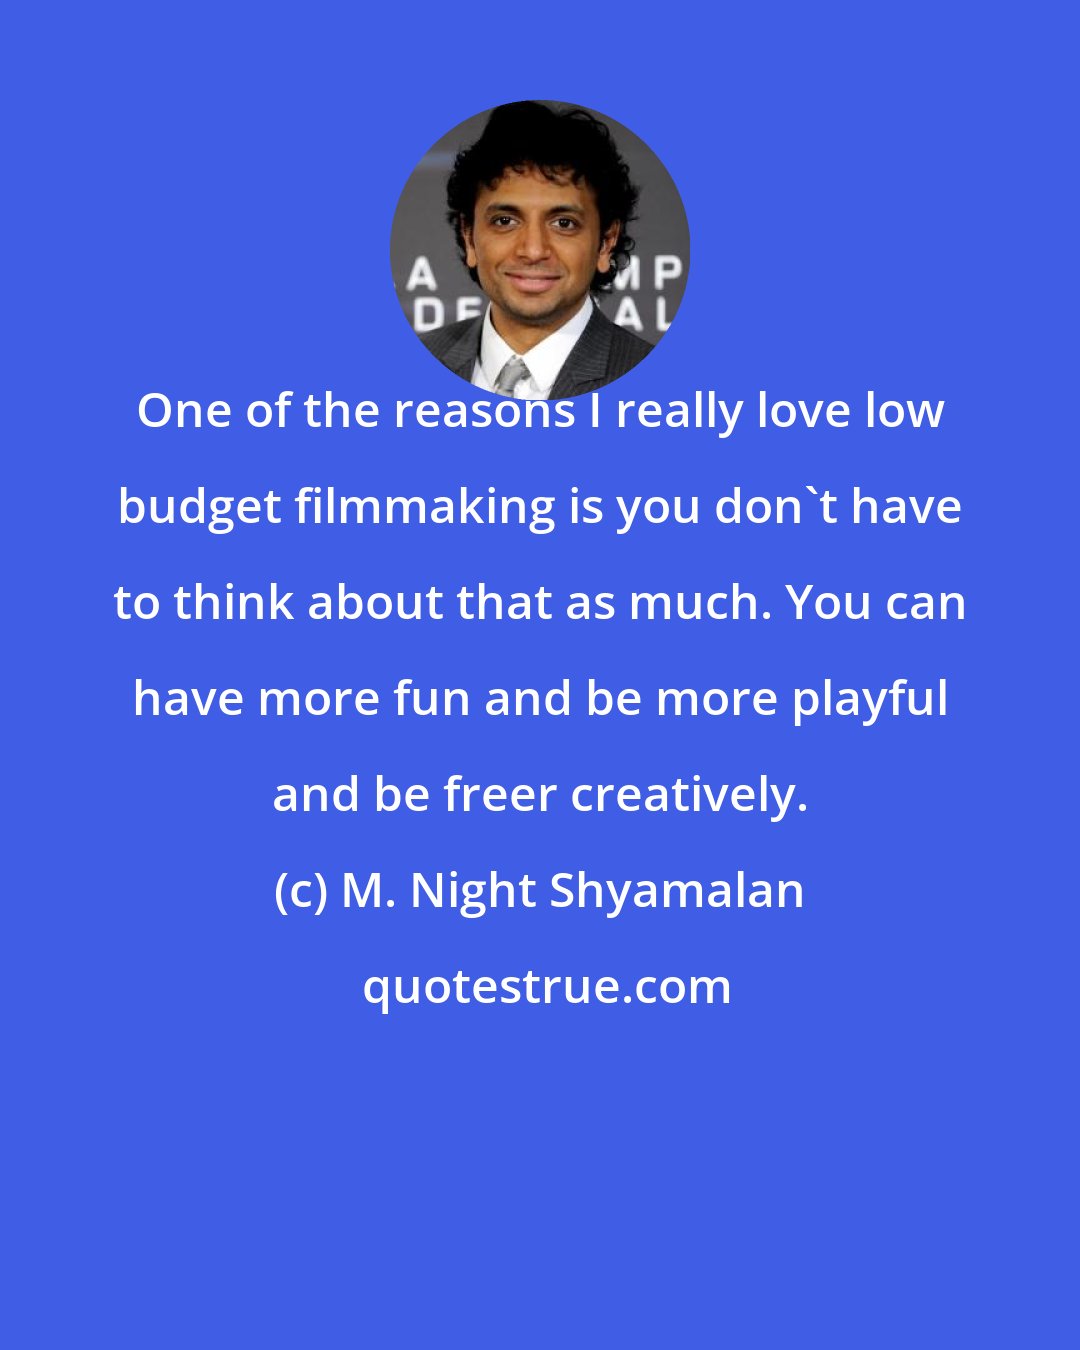 M. Night Shyamalan: One of the reasons I really love low budget filmmaking is you don't have to think about that as much. You can have more fun and be more playful and be freer creatively.